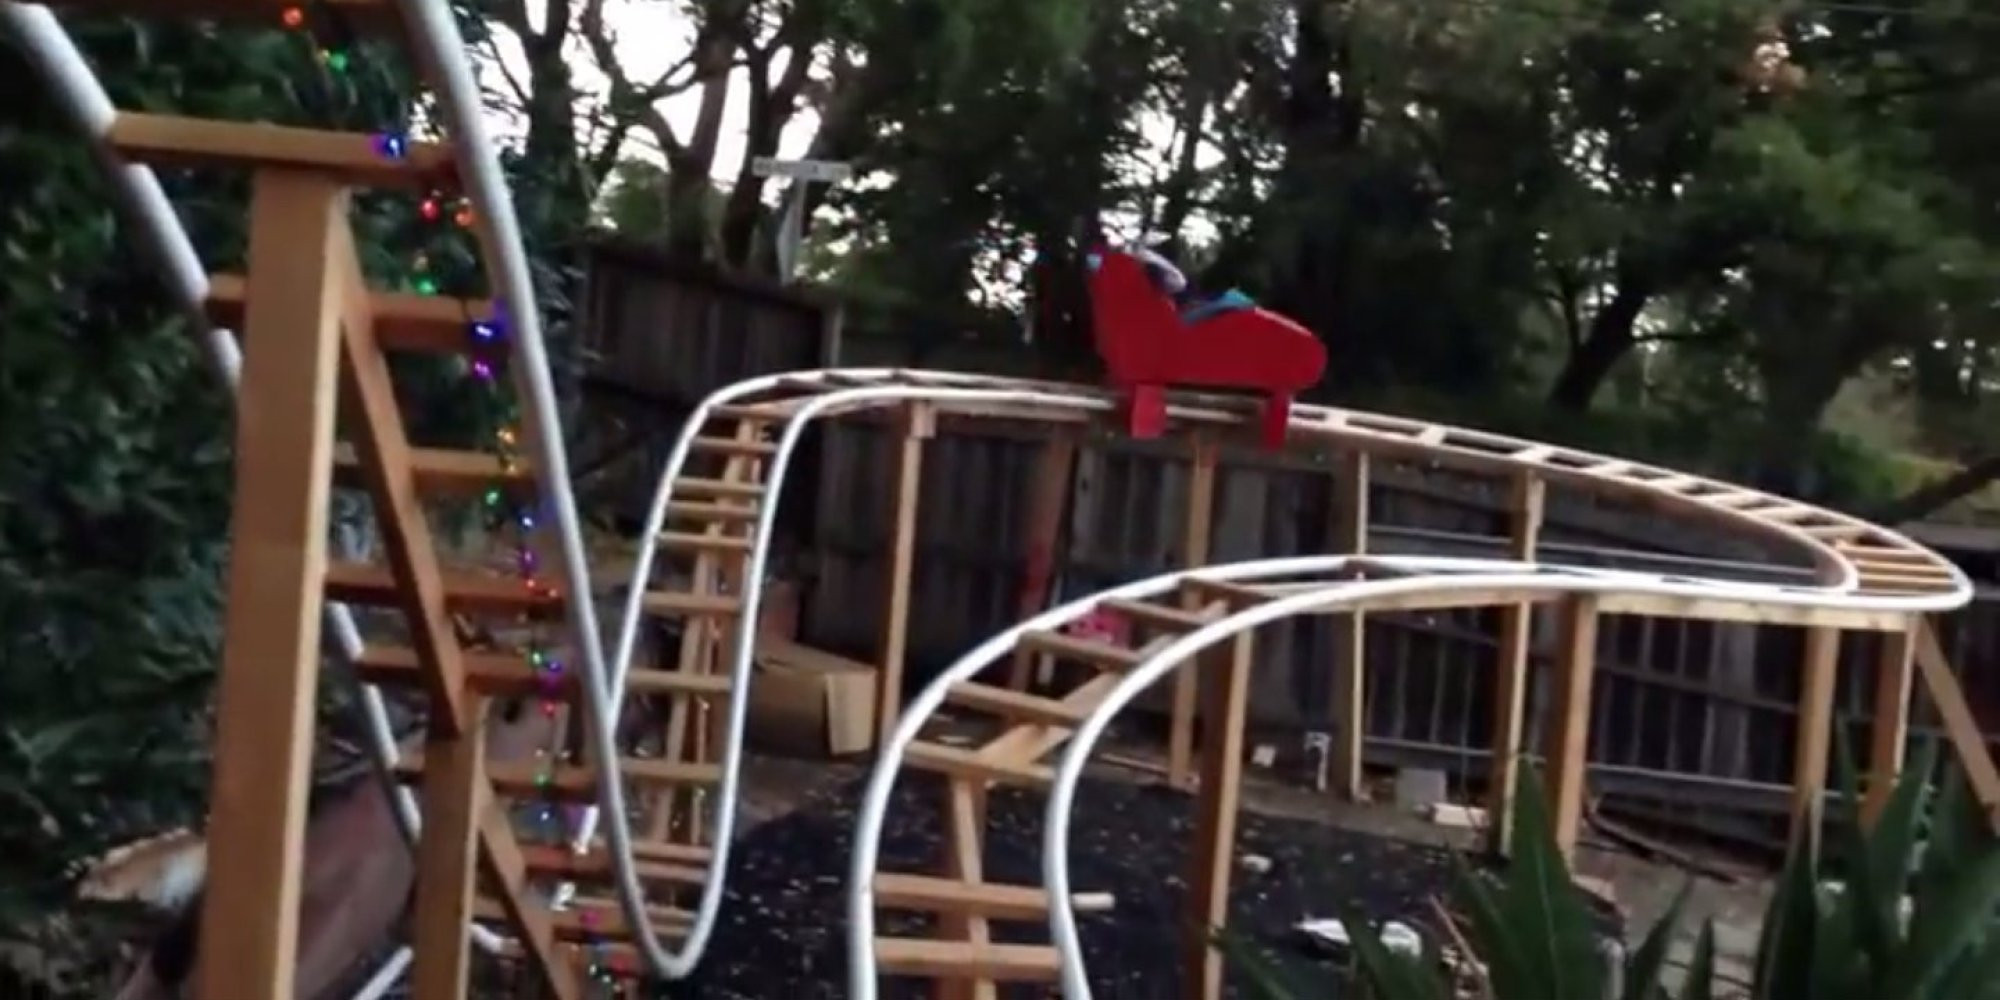 Roller Coaster In Backyard
 This Dad Built A Roller Coaster In His Backyard For His